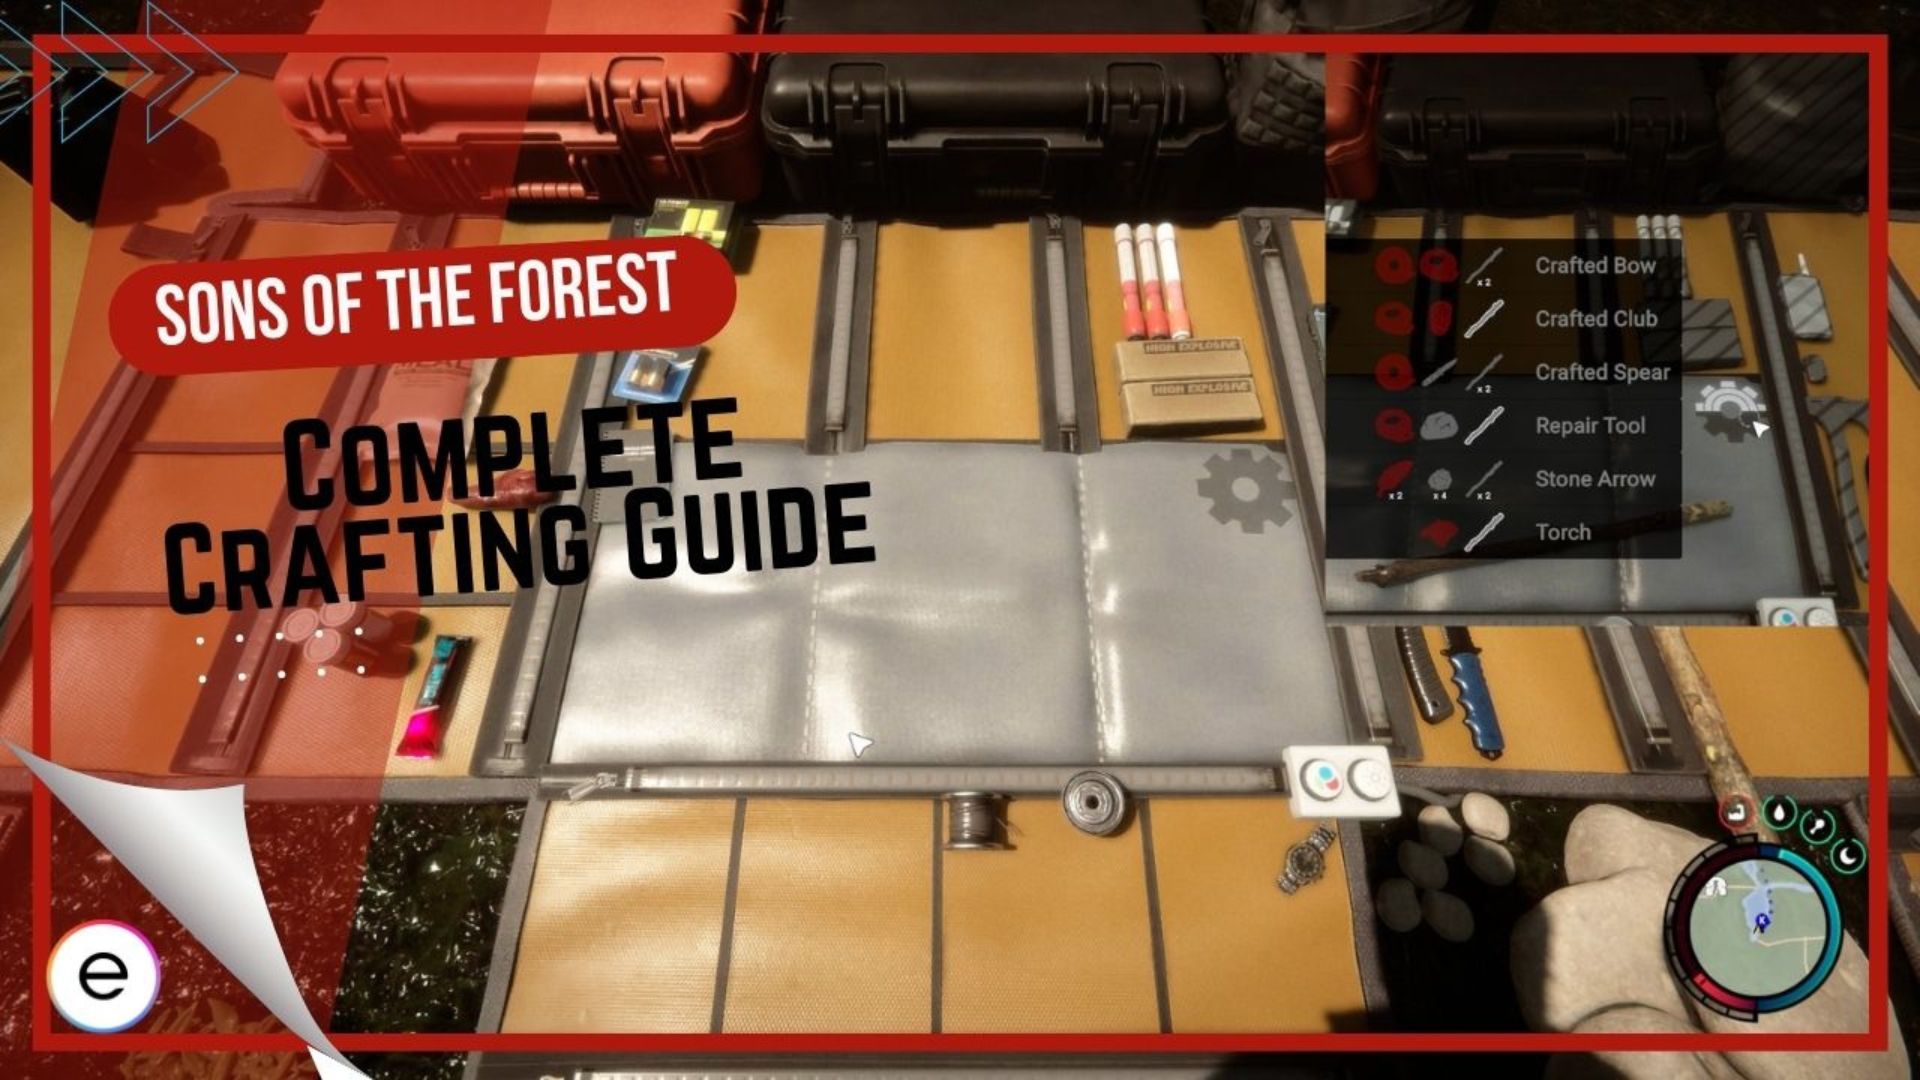 Sons Of The Forest: How To Open And Use The Guide Book